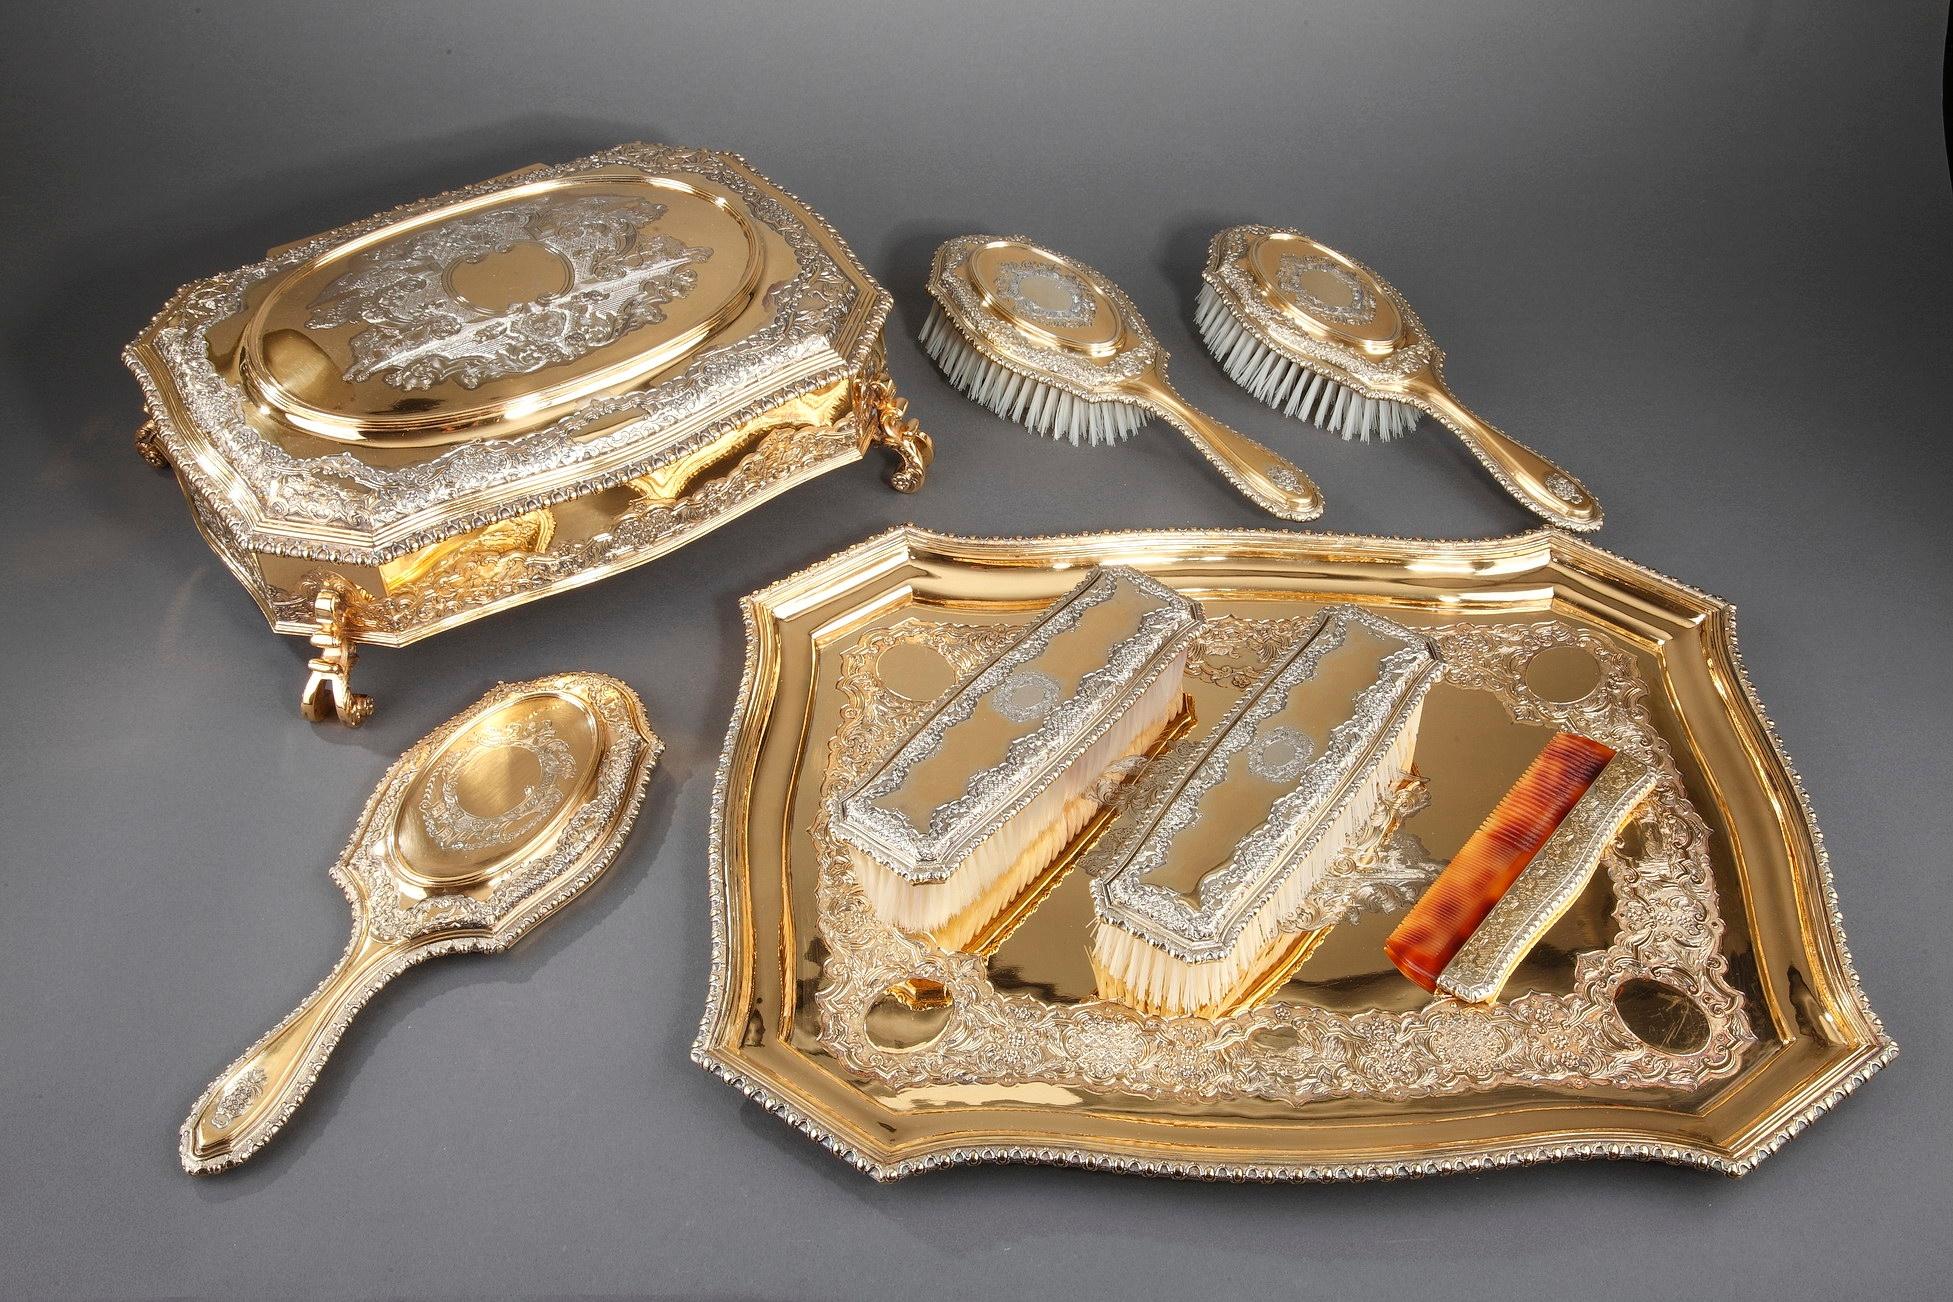 George V dressing-table service crafted of silver-gilt, comprising an oblong tray, a large jewel box with detachable velvet lining, two hair brushes, two clothes brushes, a comb and a hand mirror, all contained in a fitted red leather covered case.